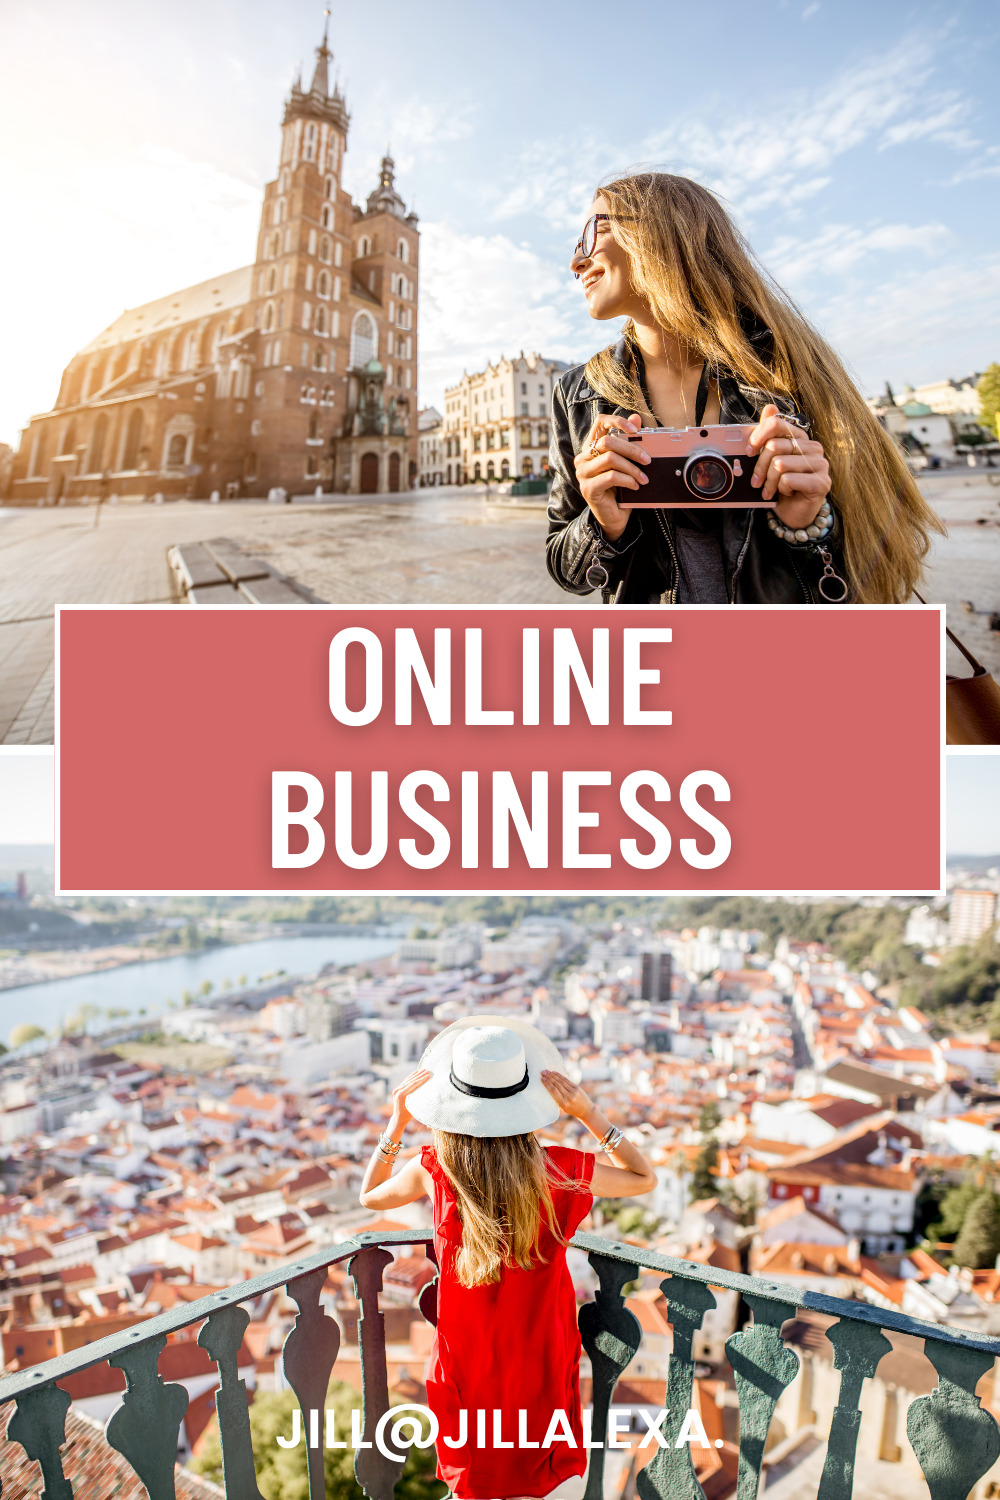 WHO IS AN ONLINE BUSINESS FOR